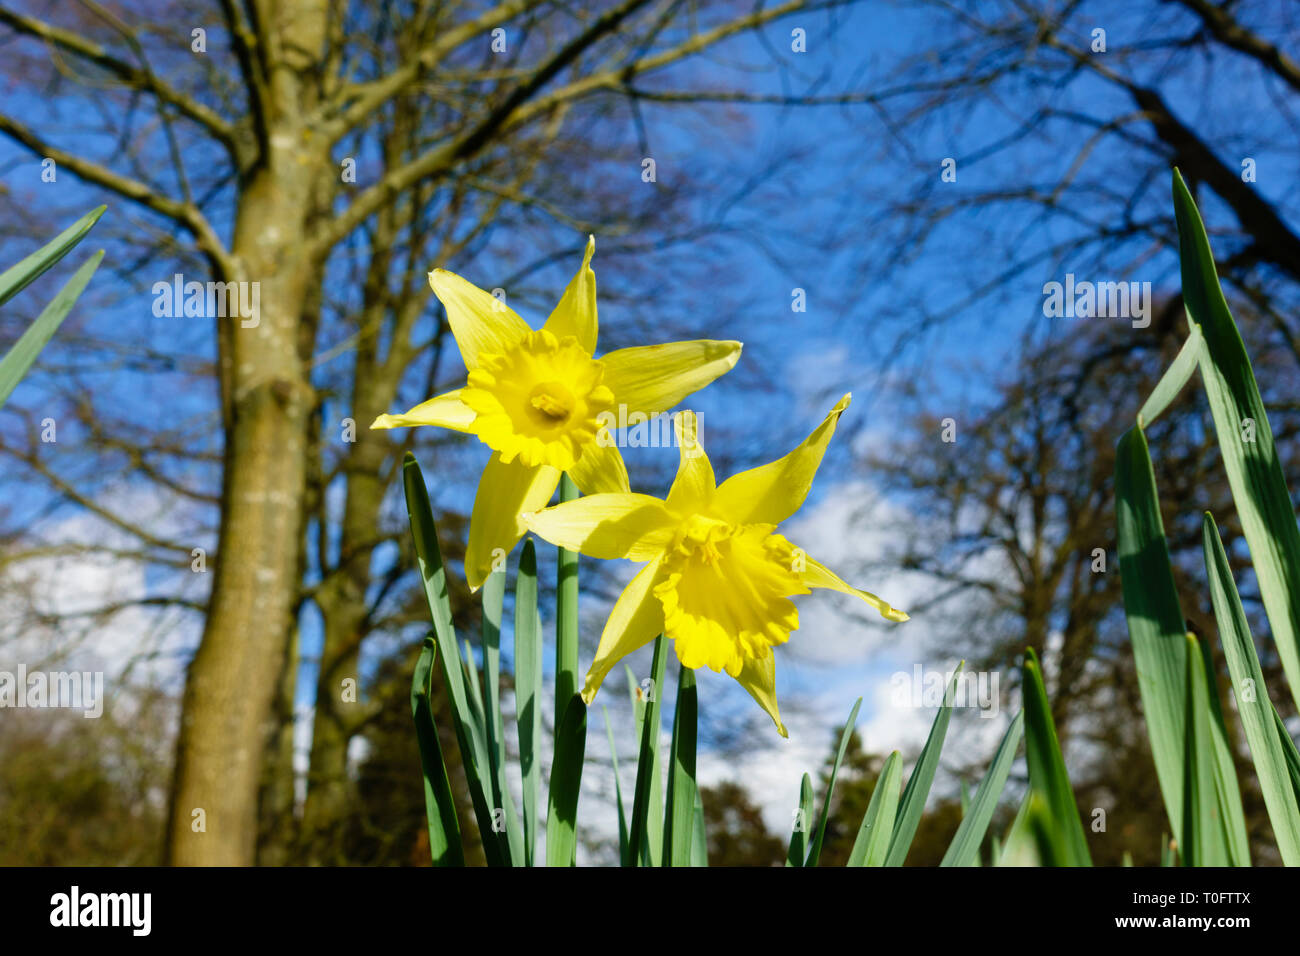 Daffodil flowers from low angle against blue sky Stock Photo